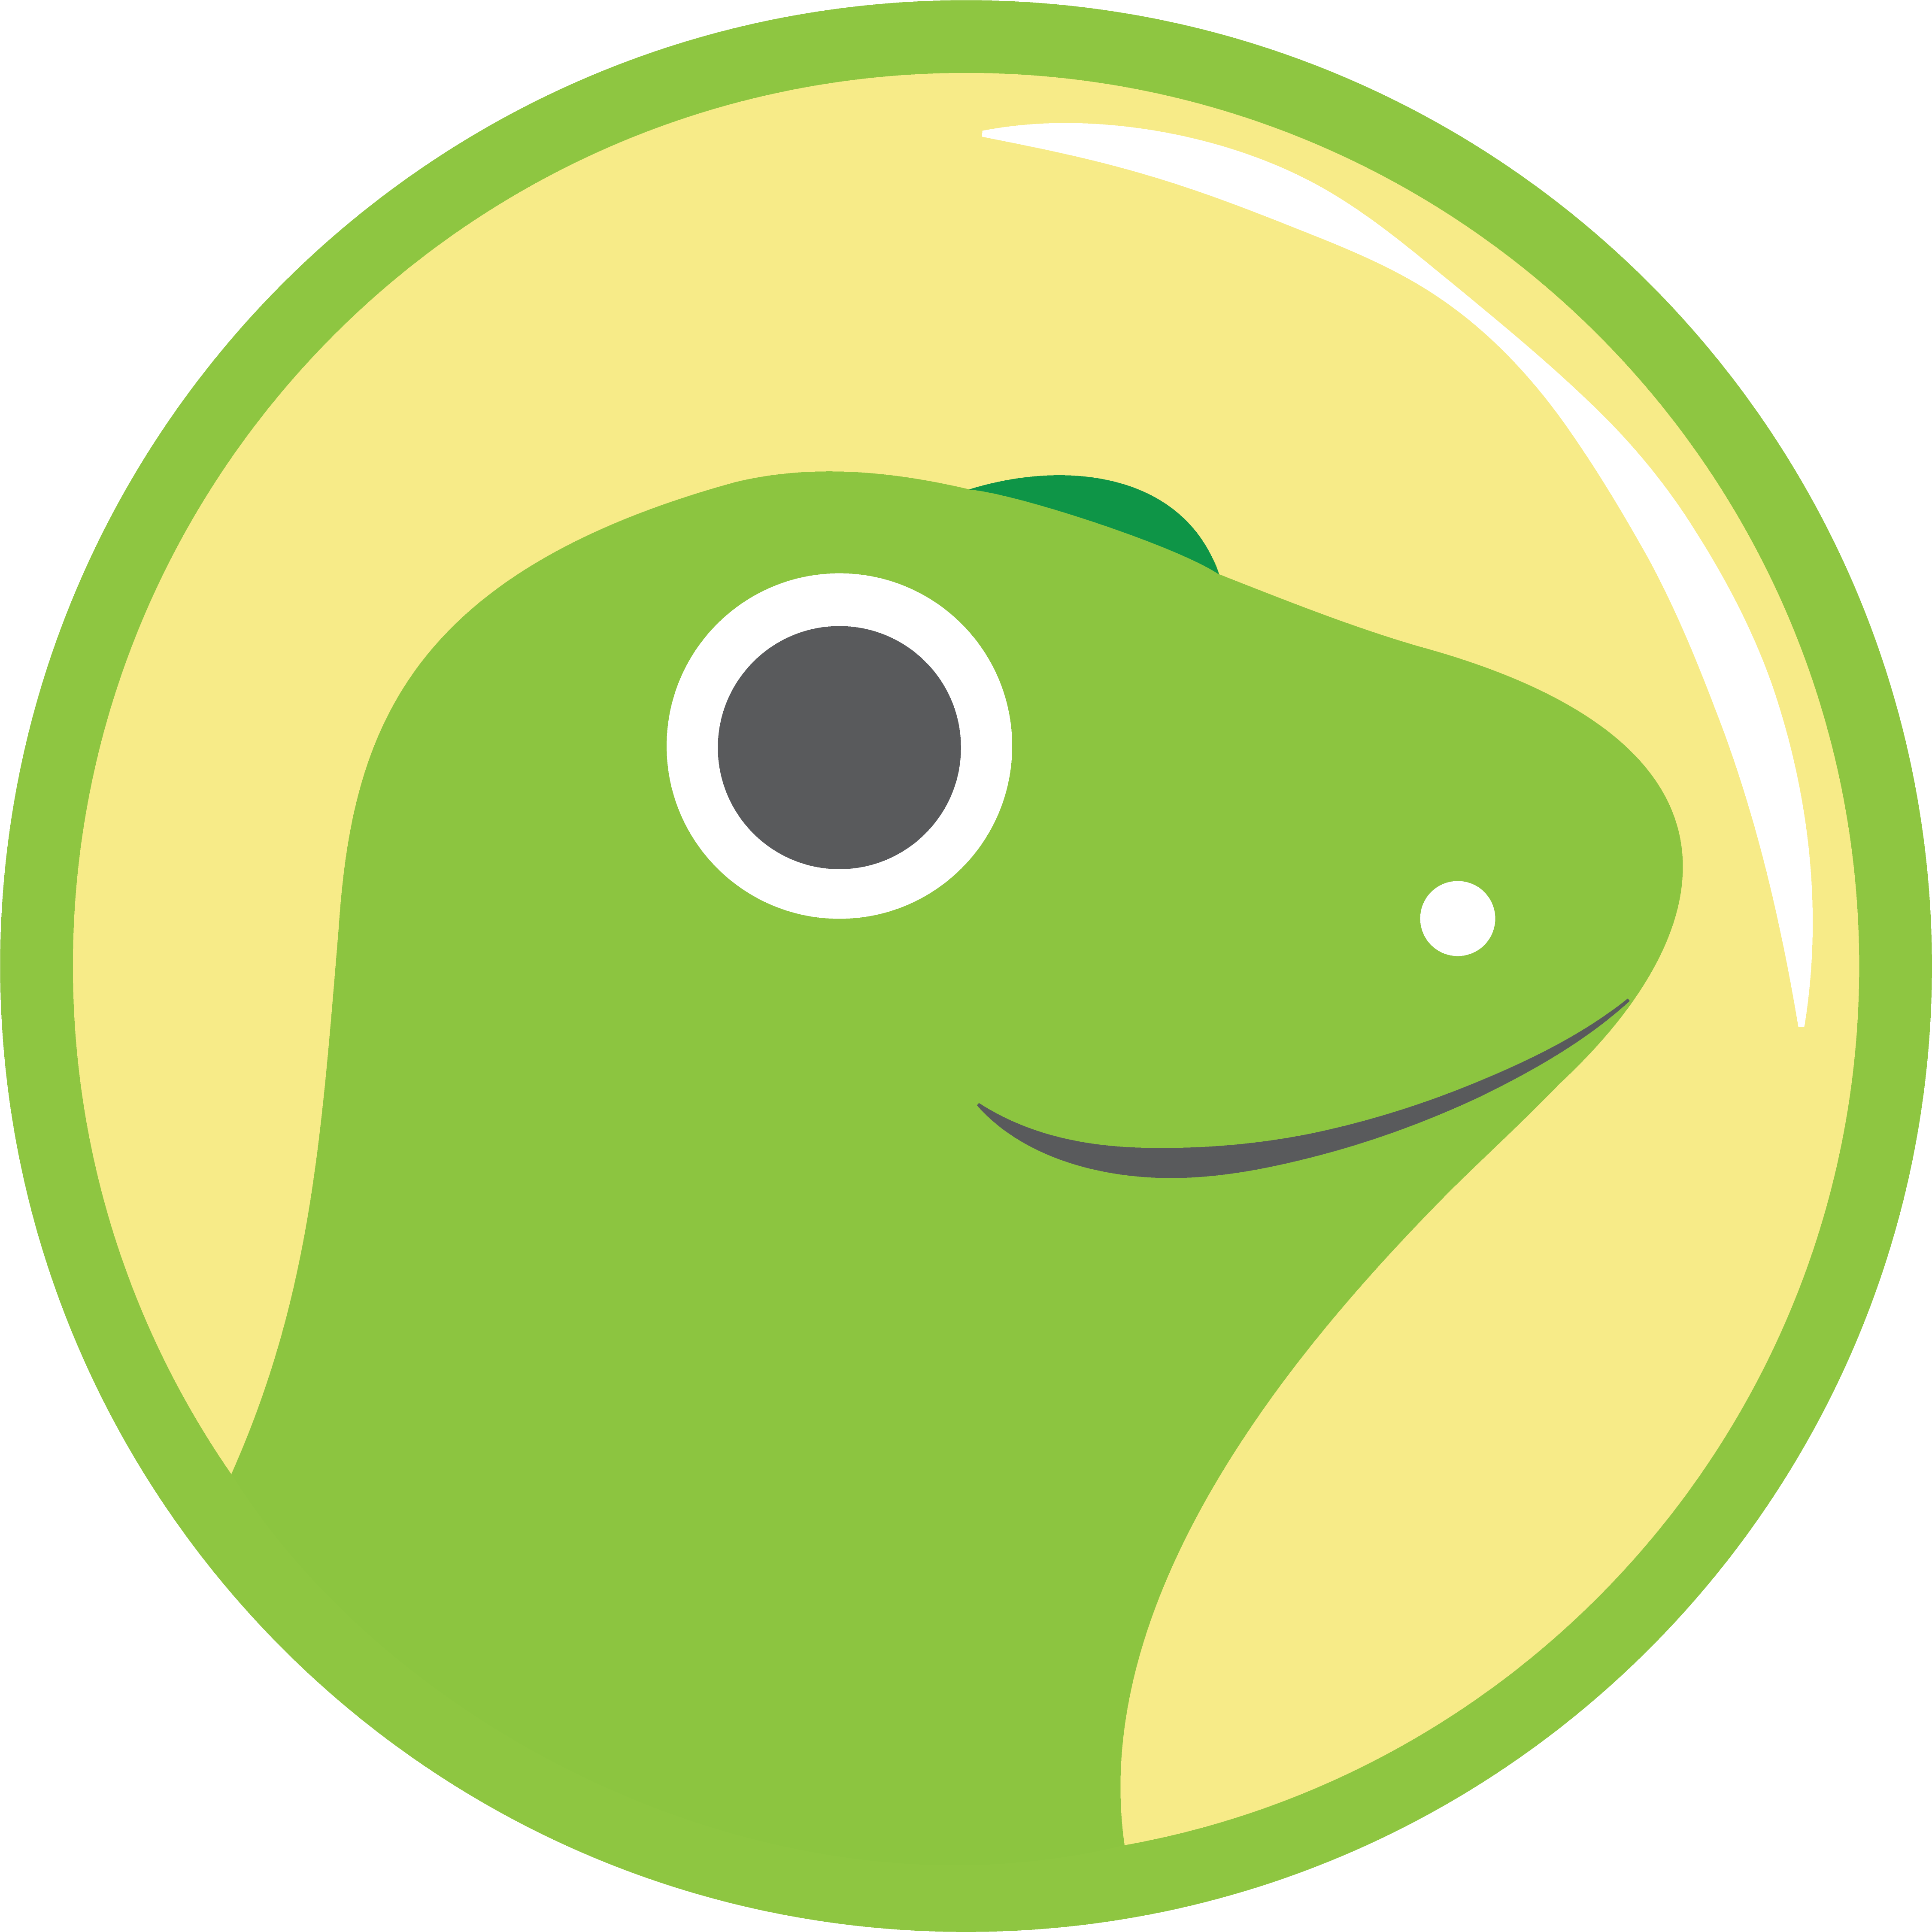 [latest] coingecko_logo_without_text